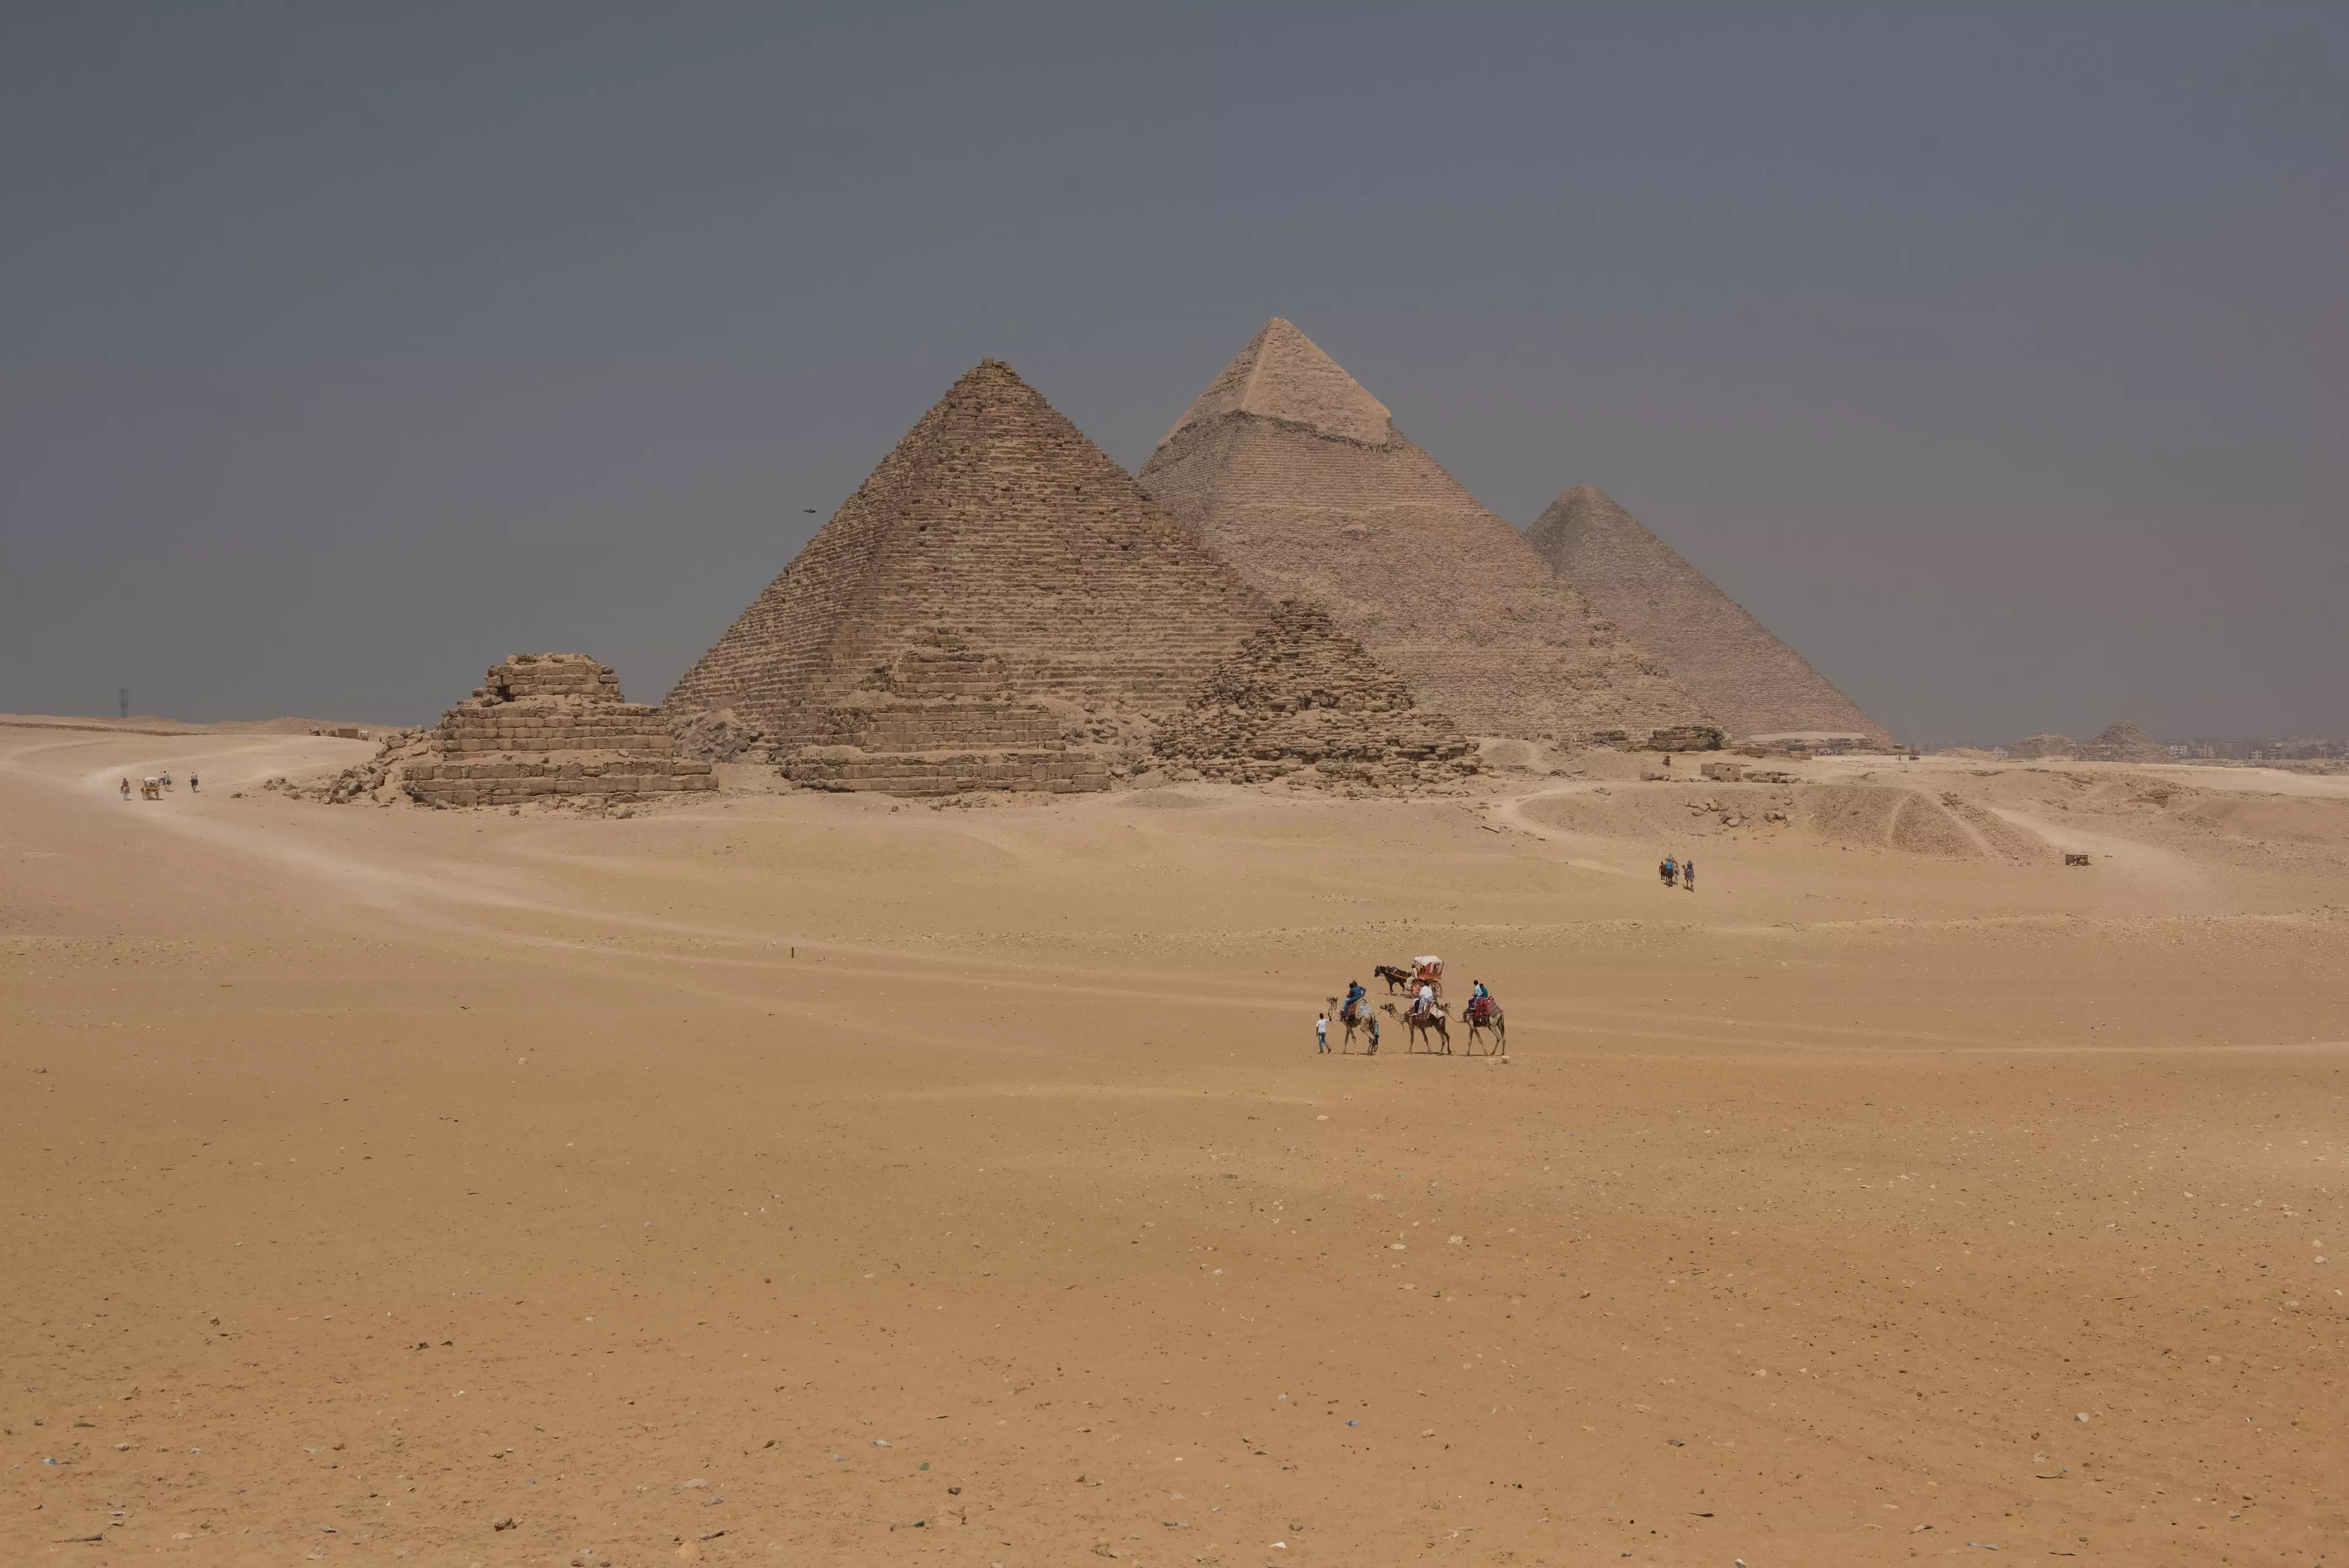 Archaeologists Think They Finally Know How The Pyramids Were Built